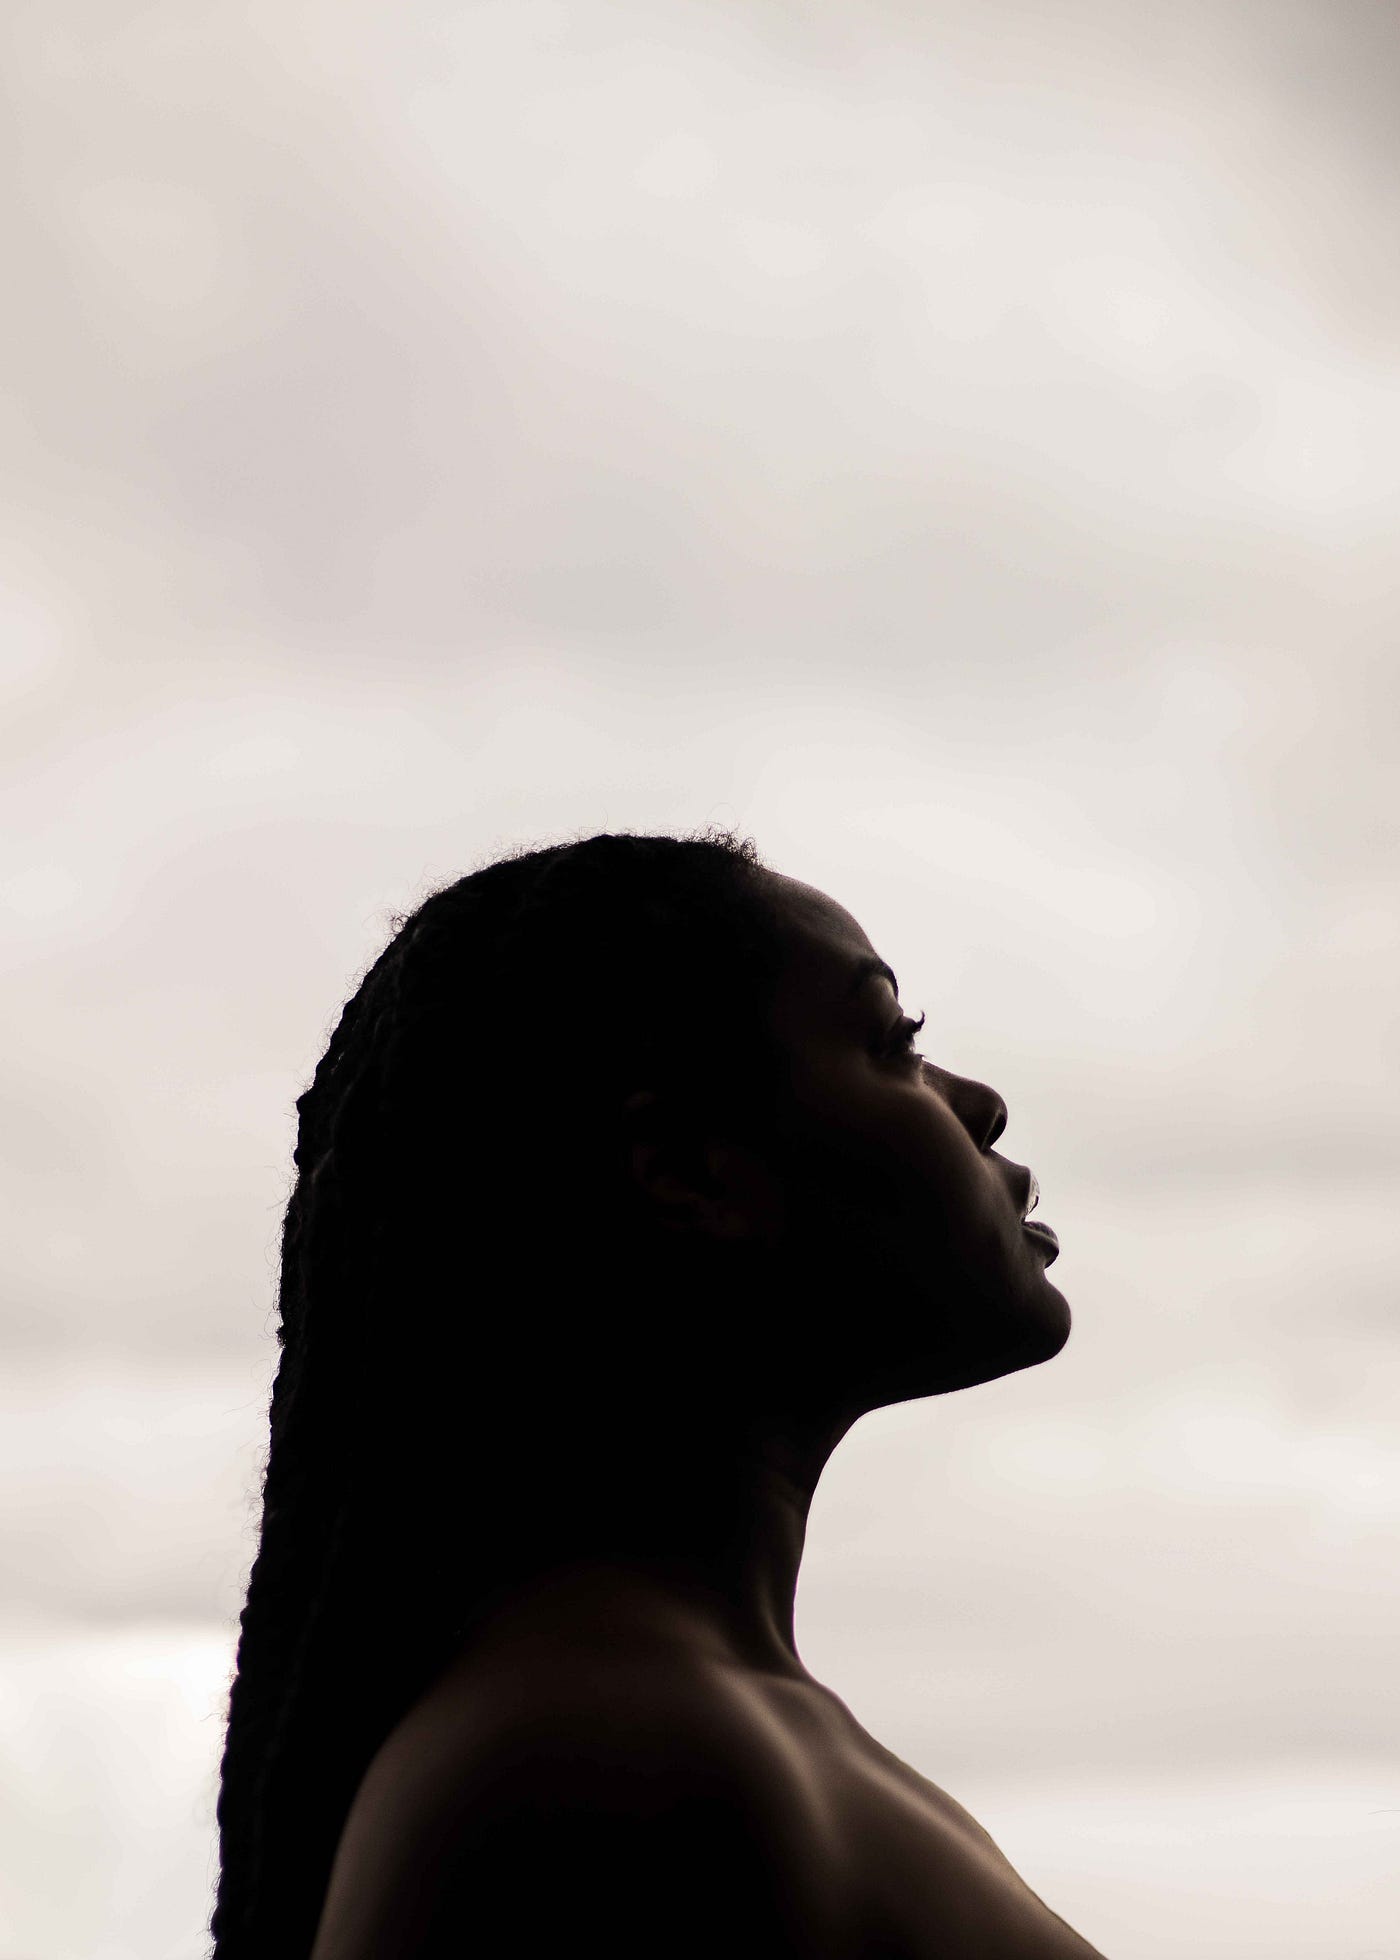 A Black woman looks up pensively in a white background.